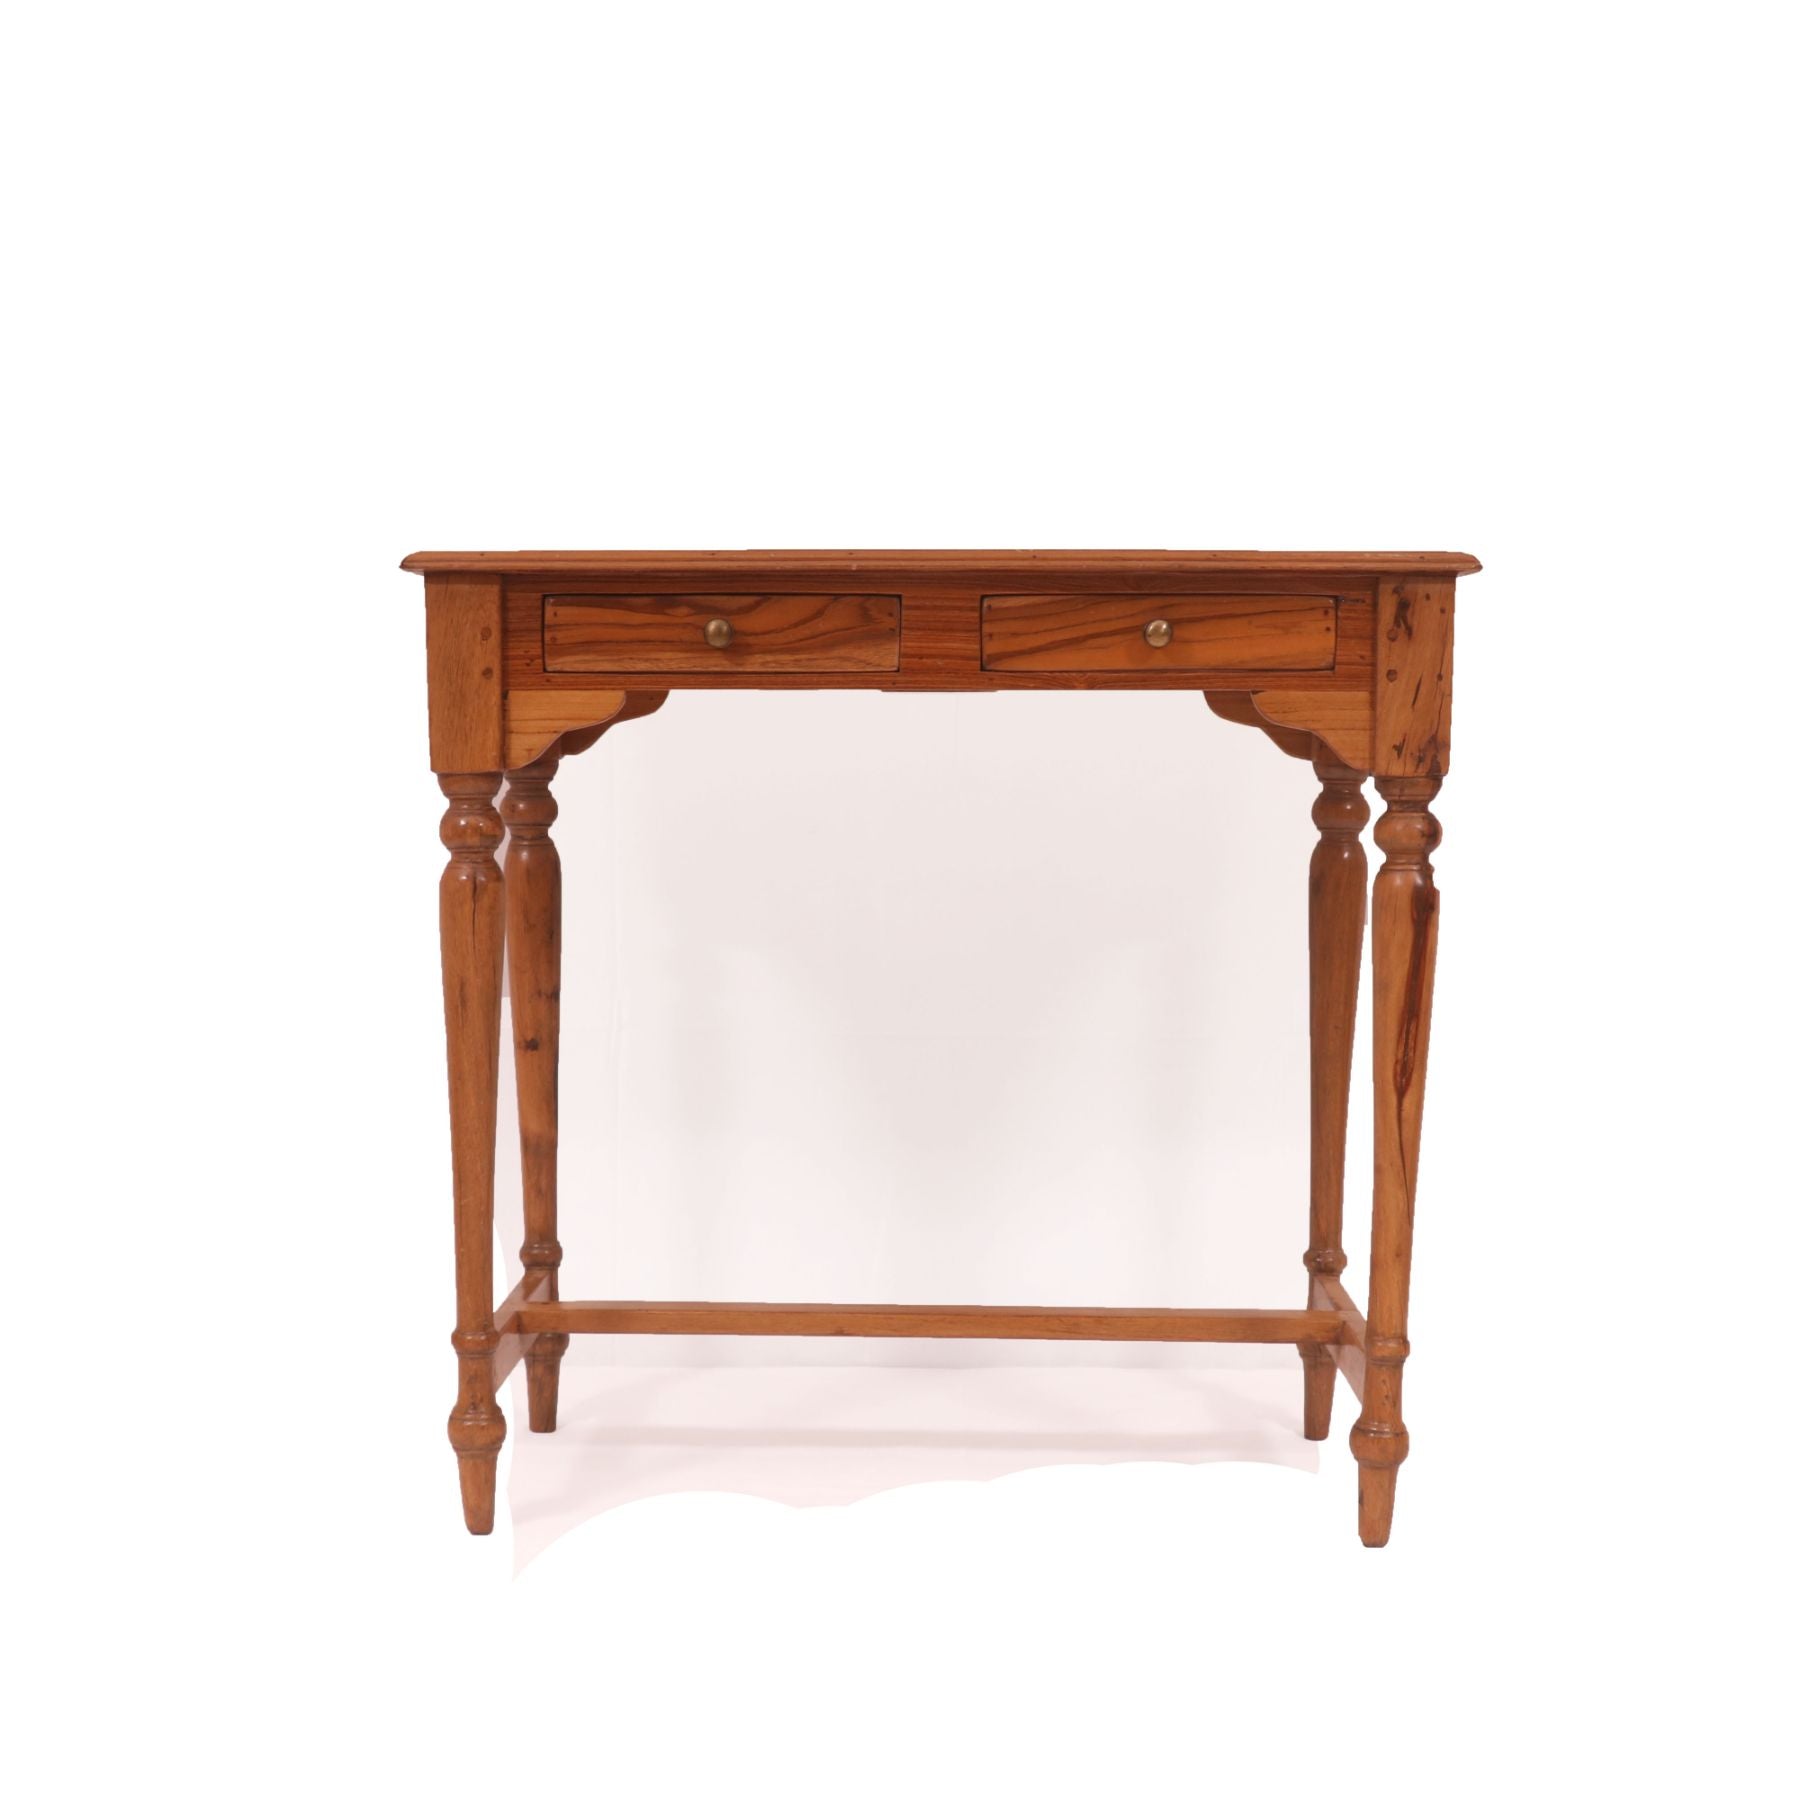 Charming Solid Wood Study Table Desk Study Table